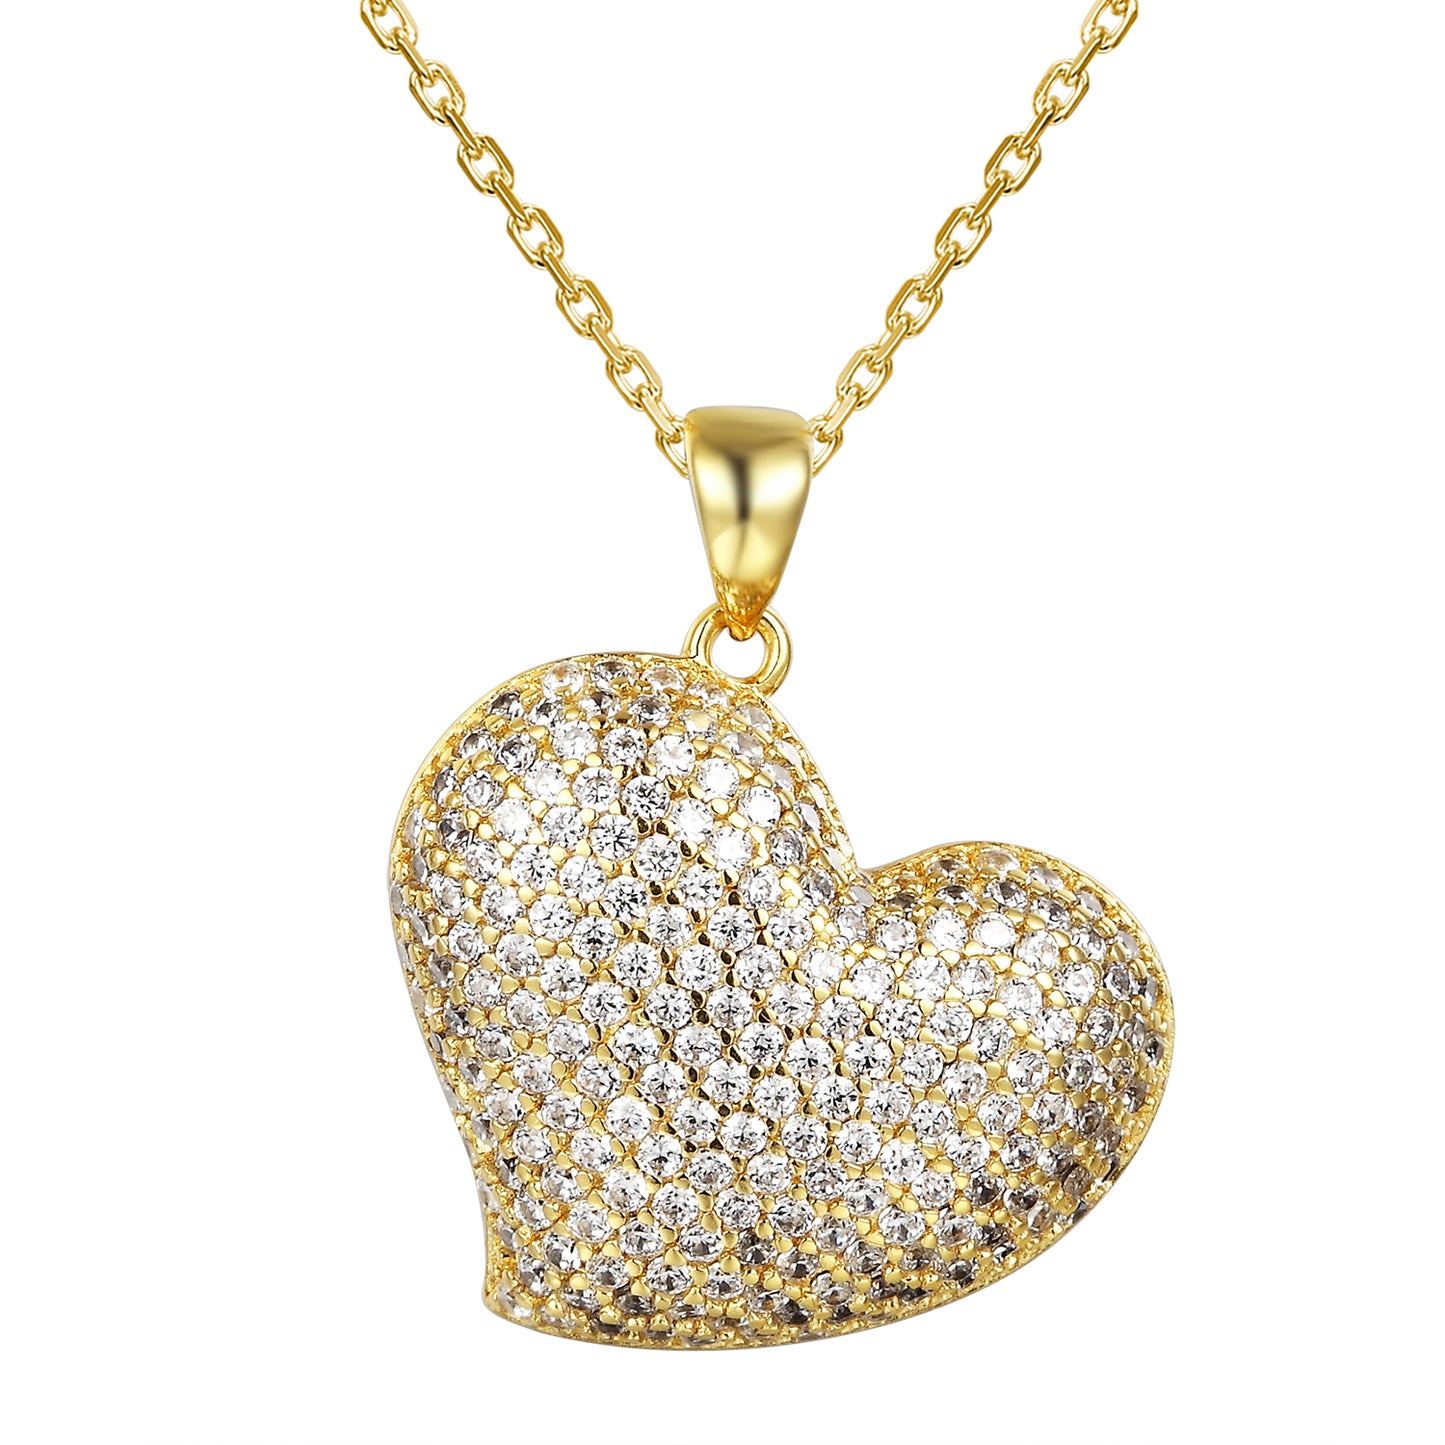 Tilted Puffed Heart 14k Gold Finish Silver Pendant Valentine's